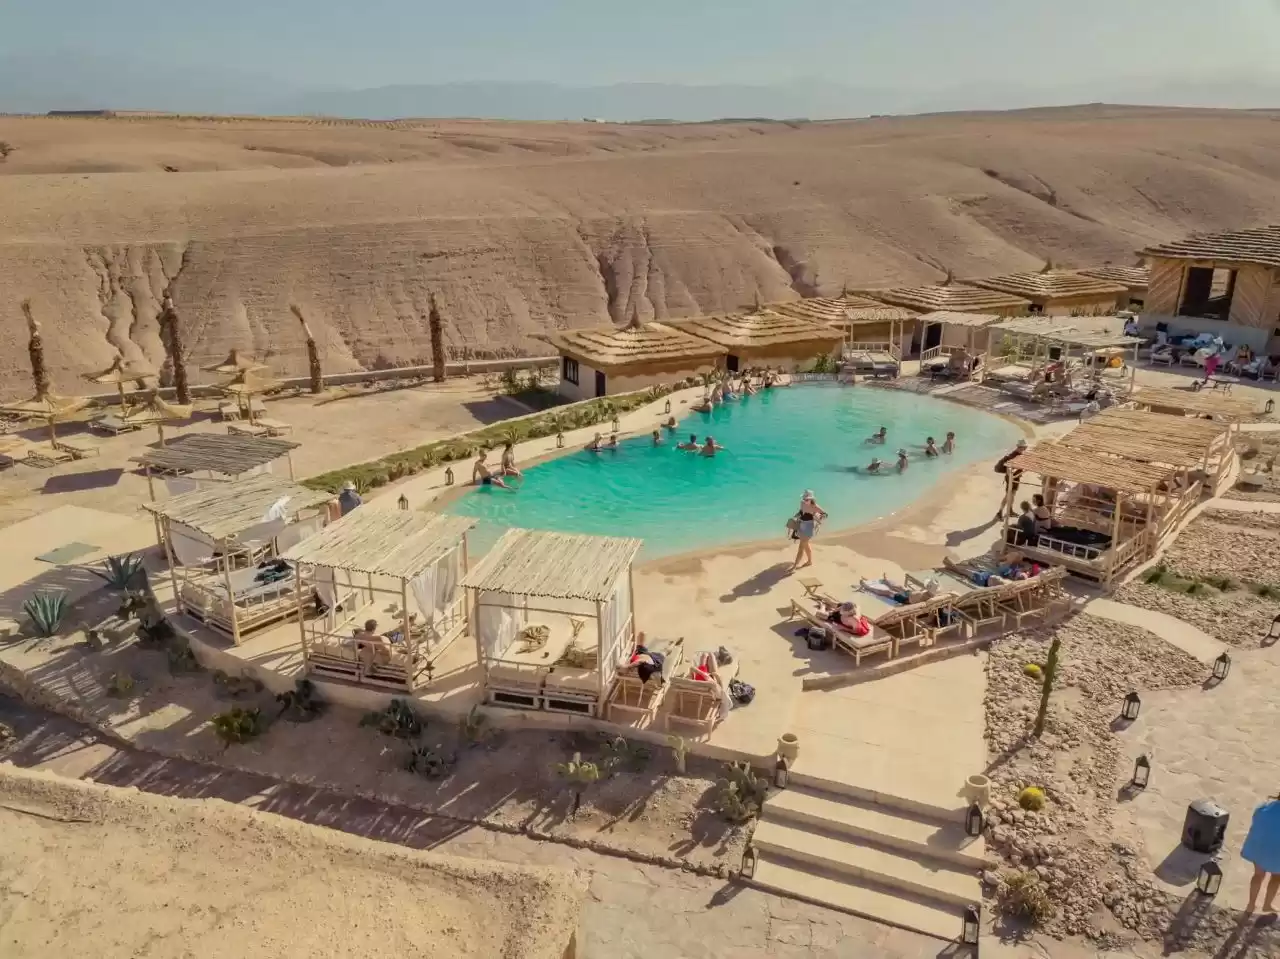 Access to the Swimming Pool + Lunch in the Desert + Transfer